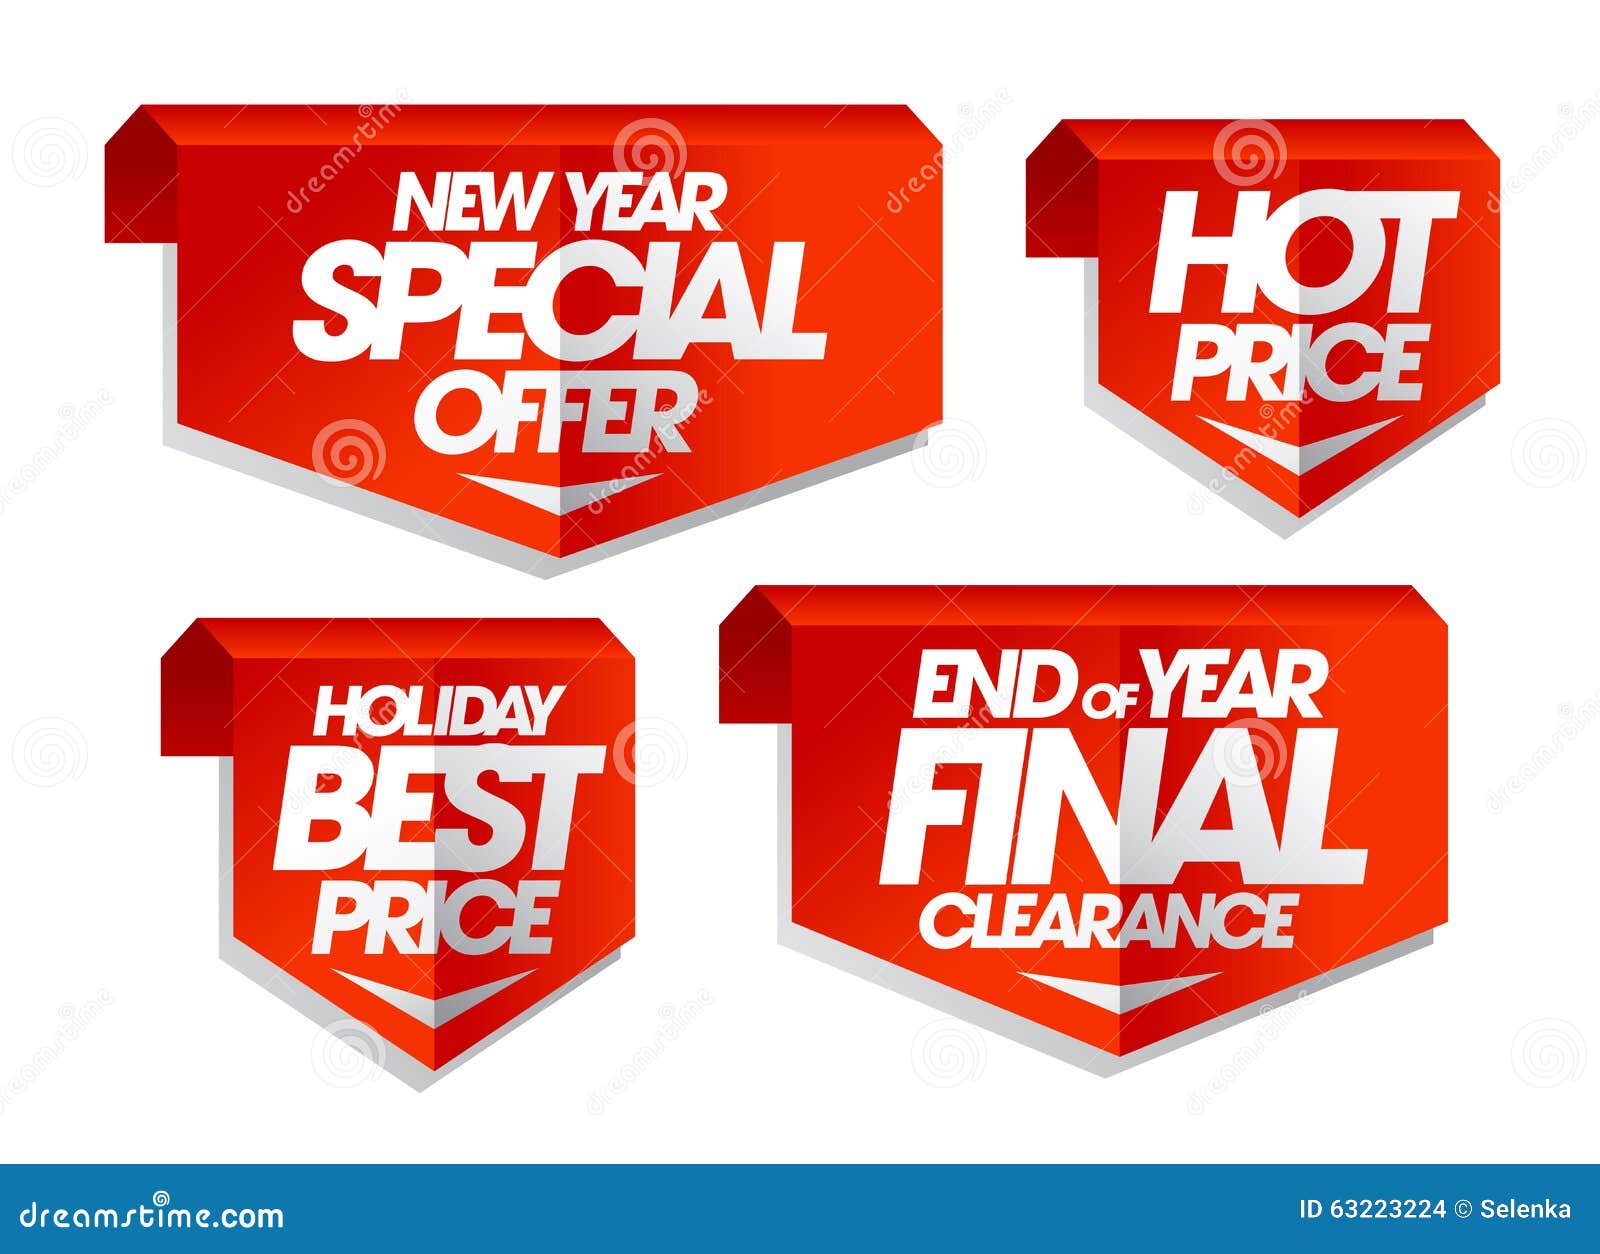 new year special offer, hot price, holiday best price, end of year final clearance sale tags.